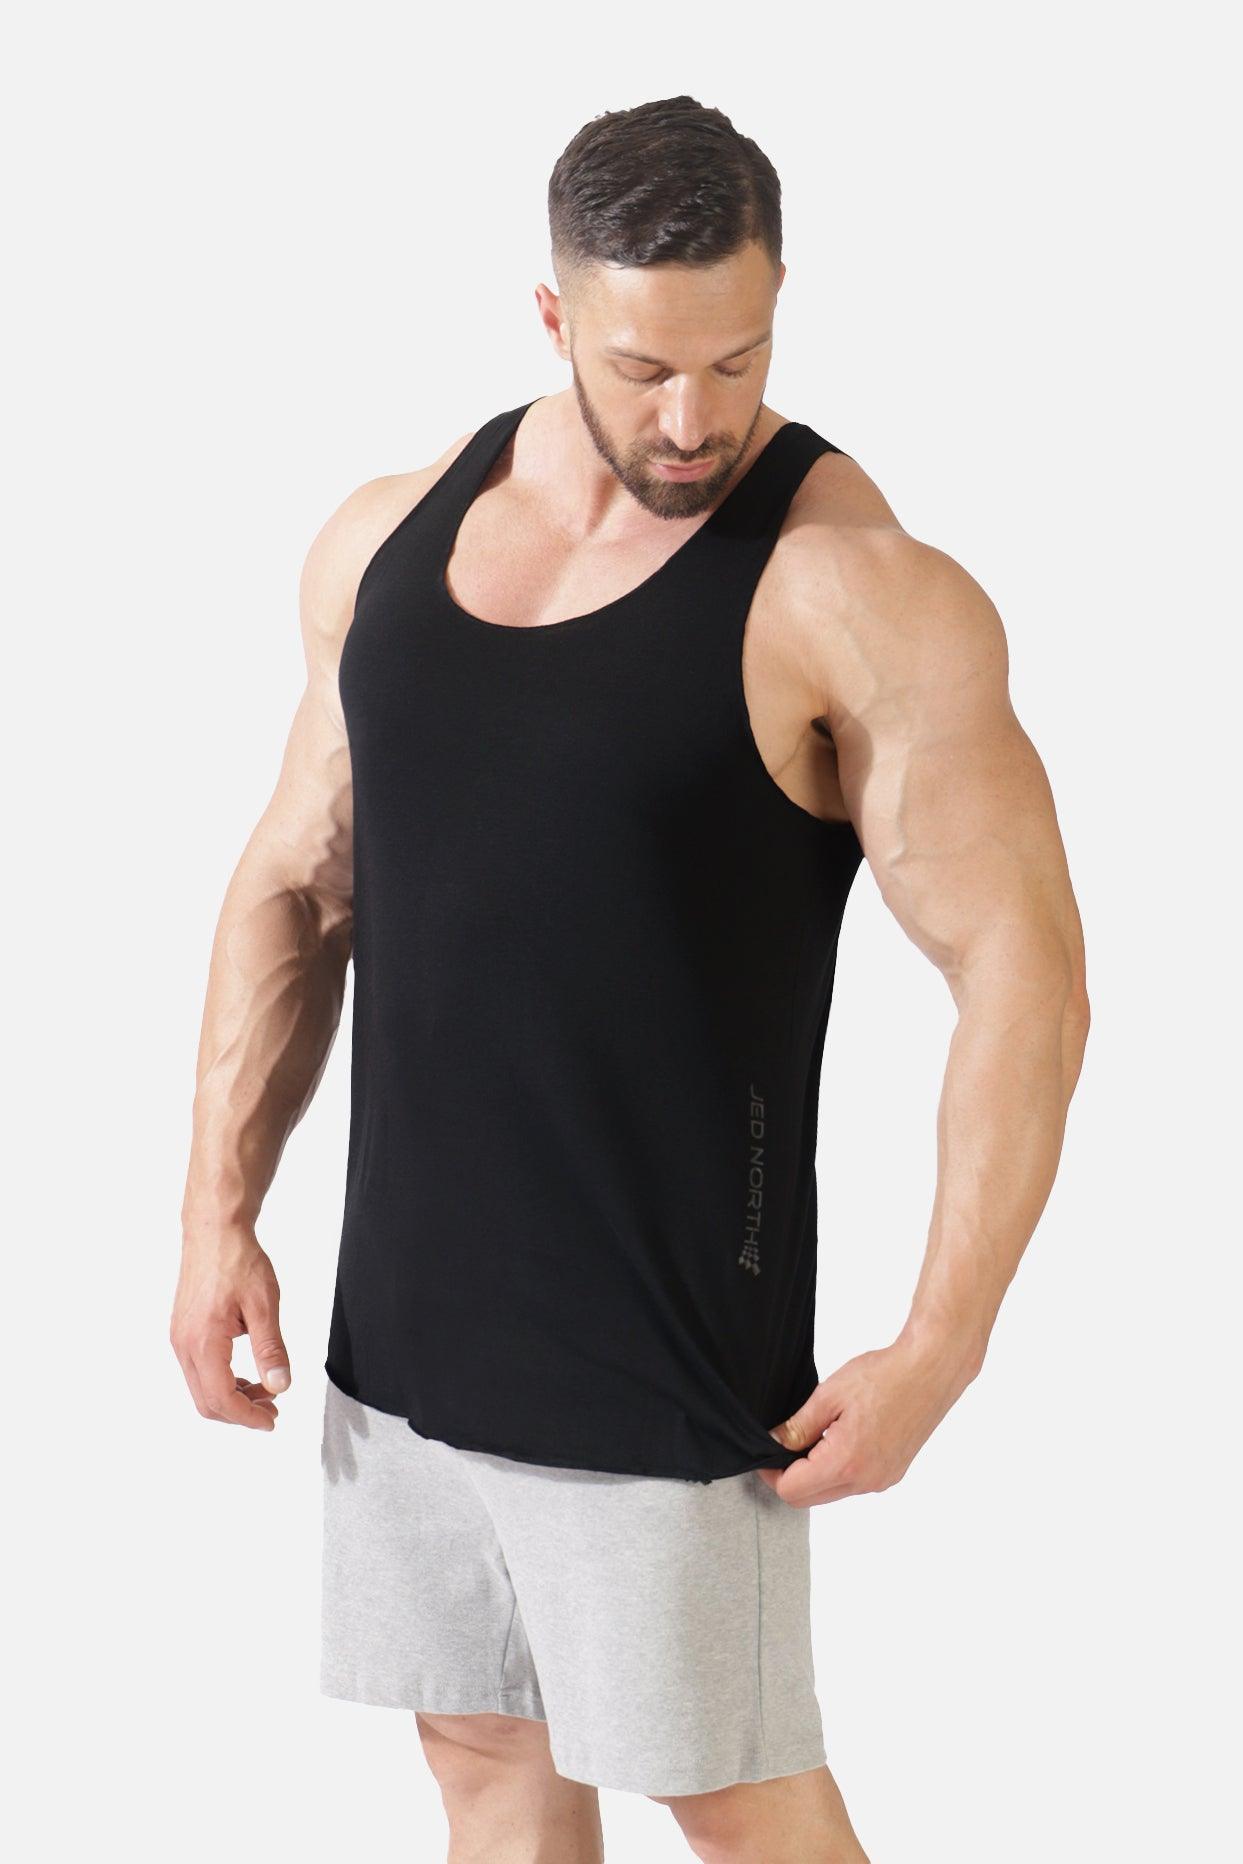 Workout Tank Tops for Men | Bodybuilding Fitness Gym Wear| Jed North